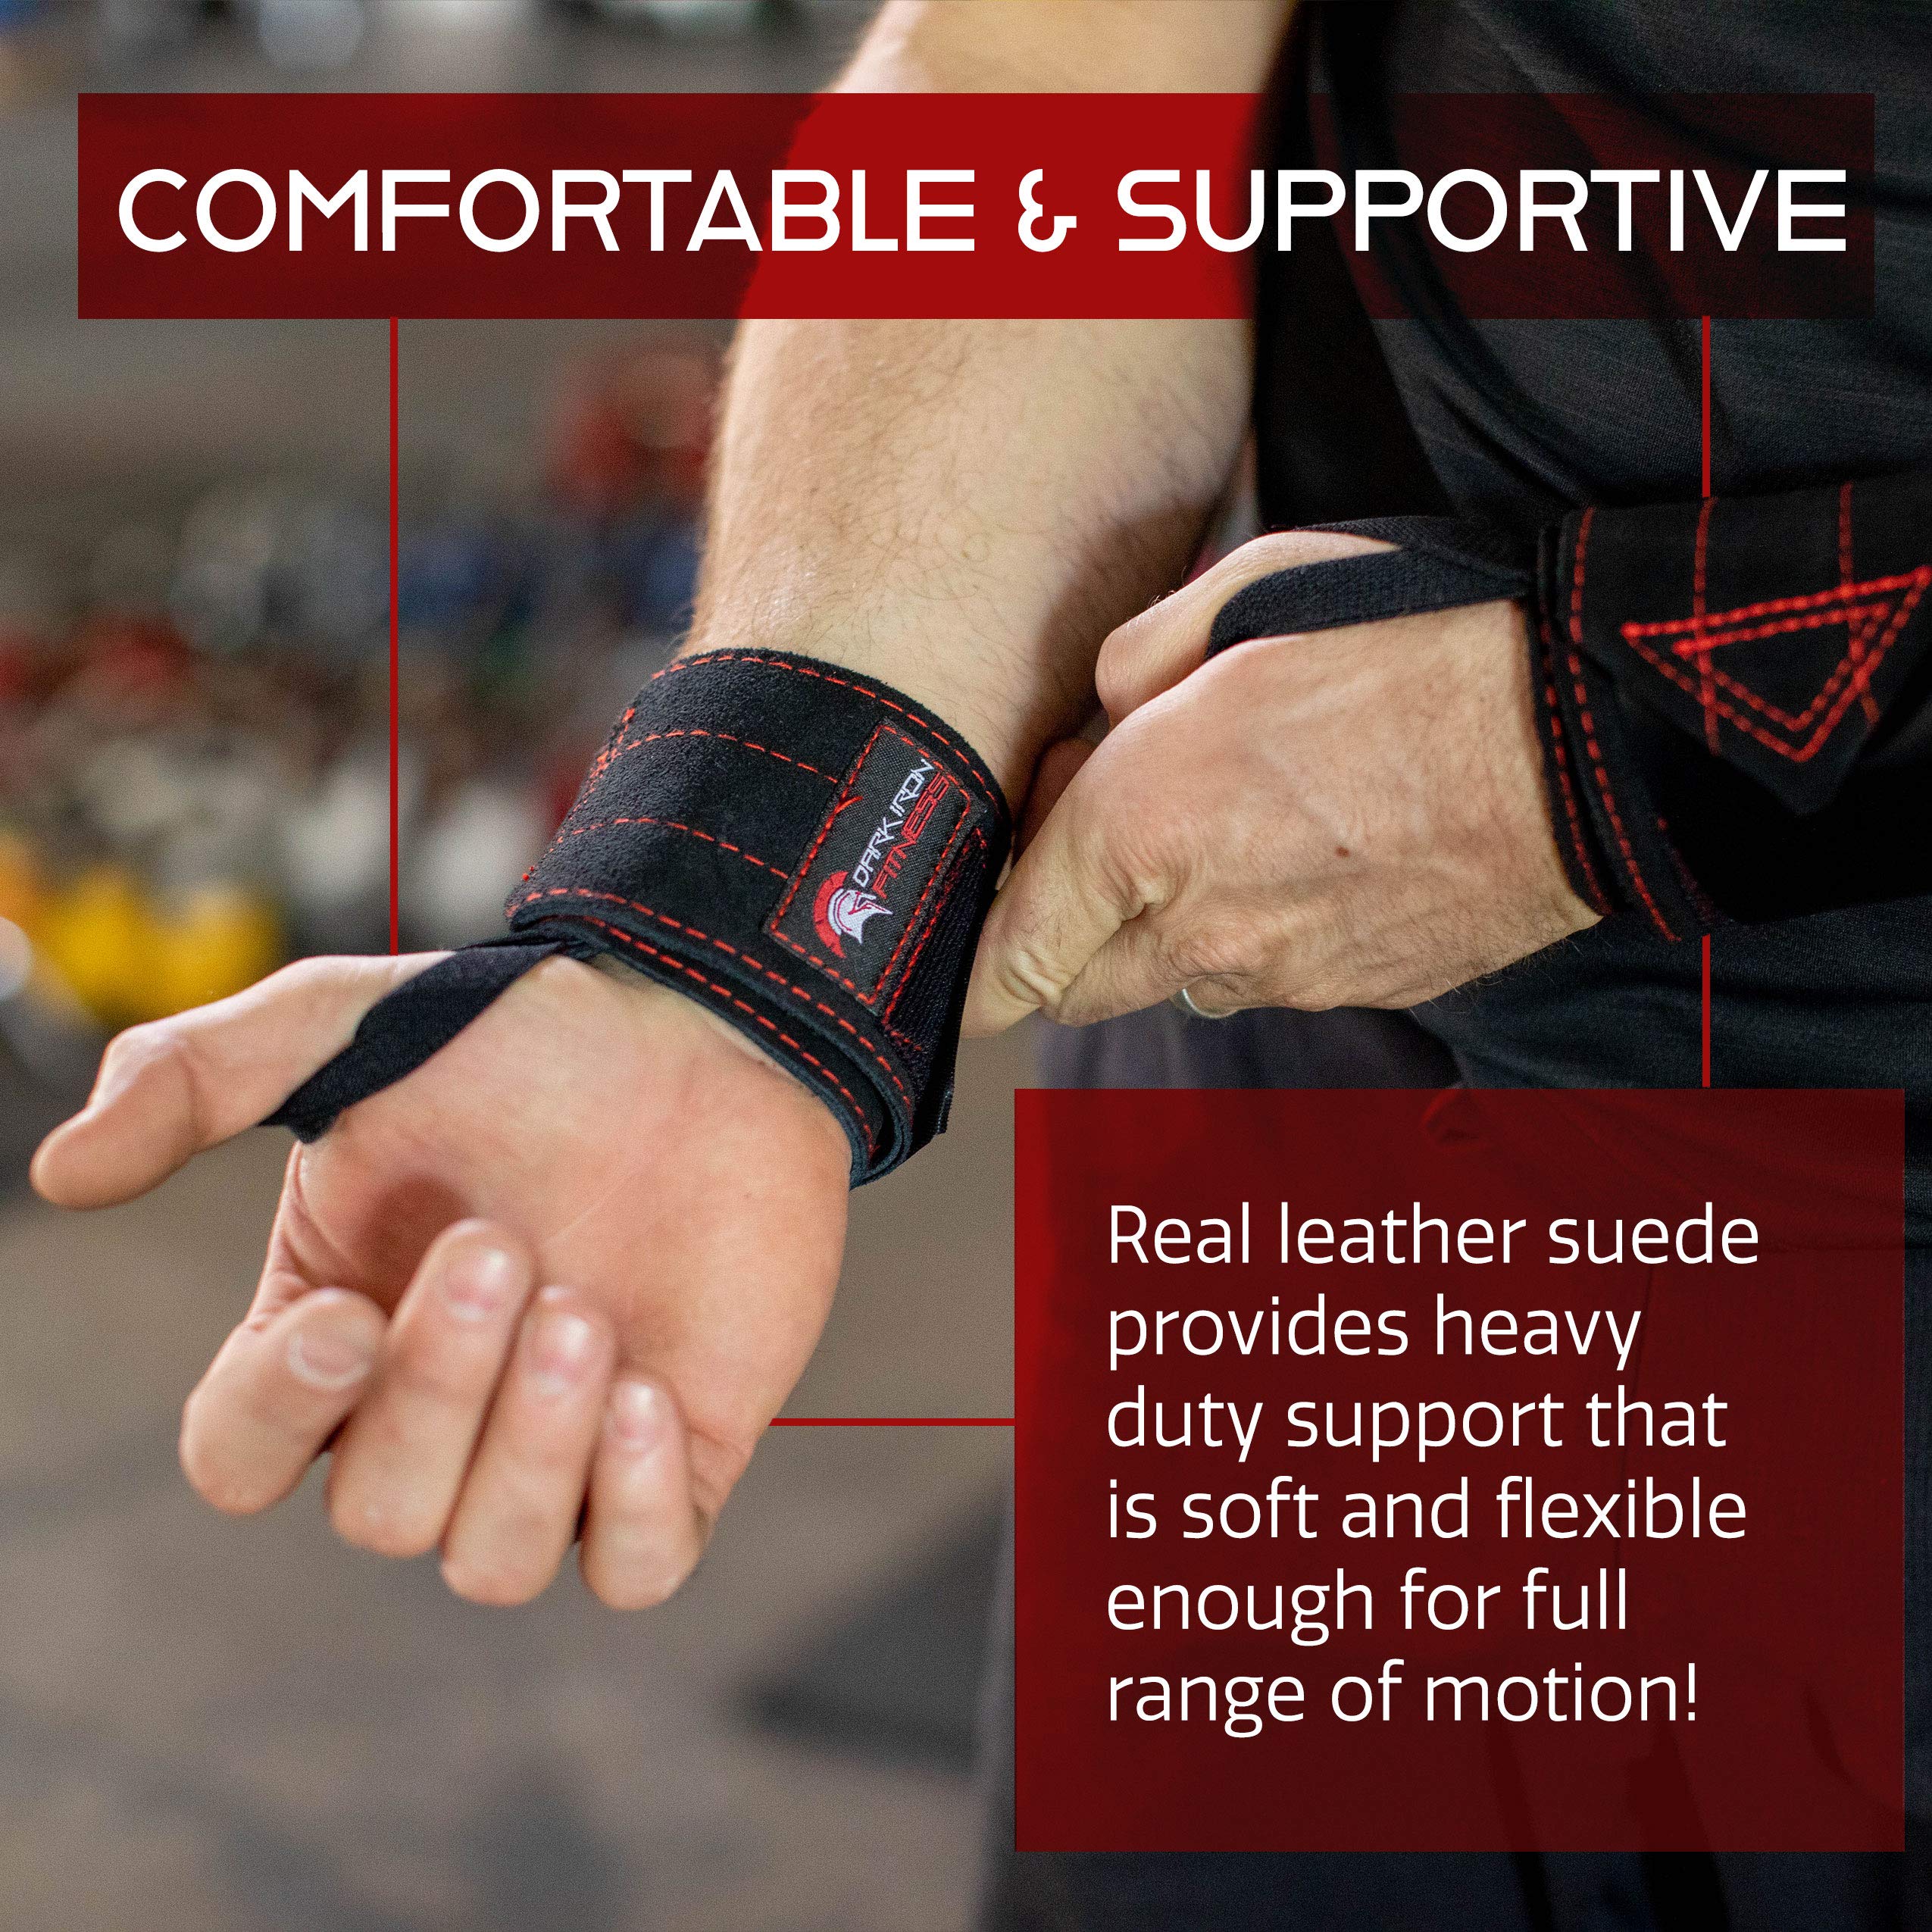 Dark Iron Fitness Leather Weight Lifting Wrist Wraps - Brace for Lifting